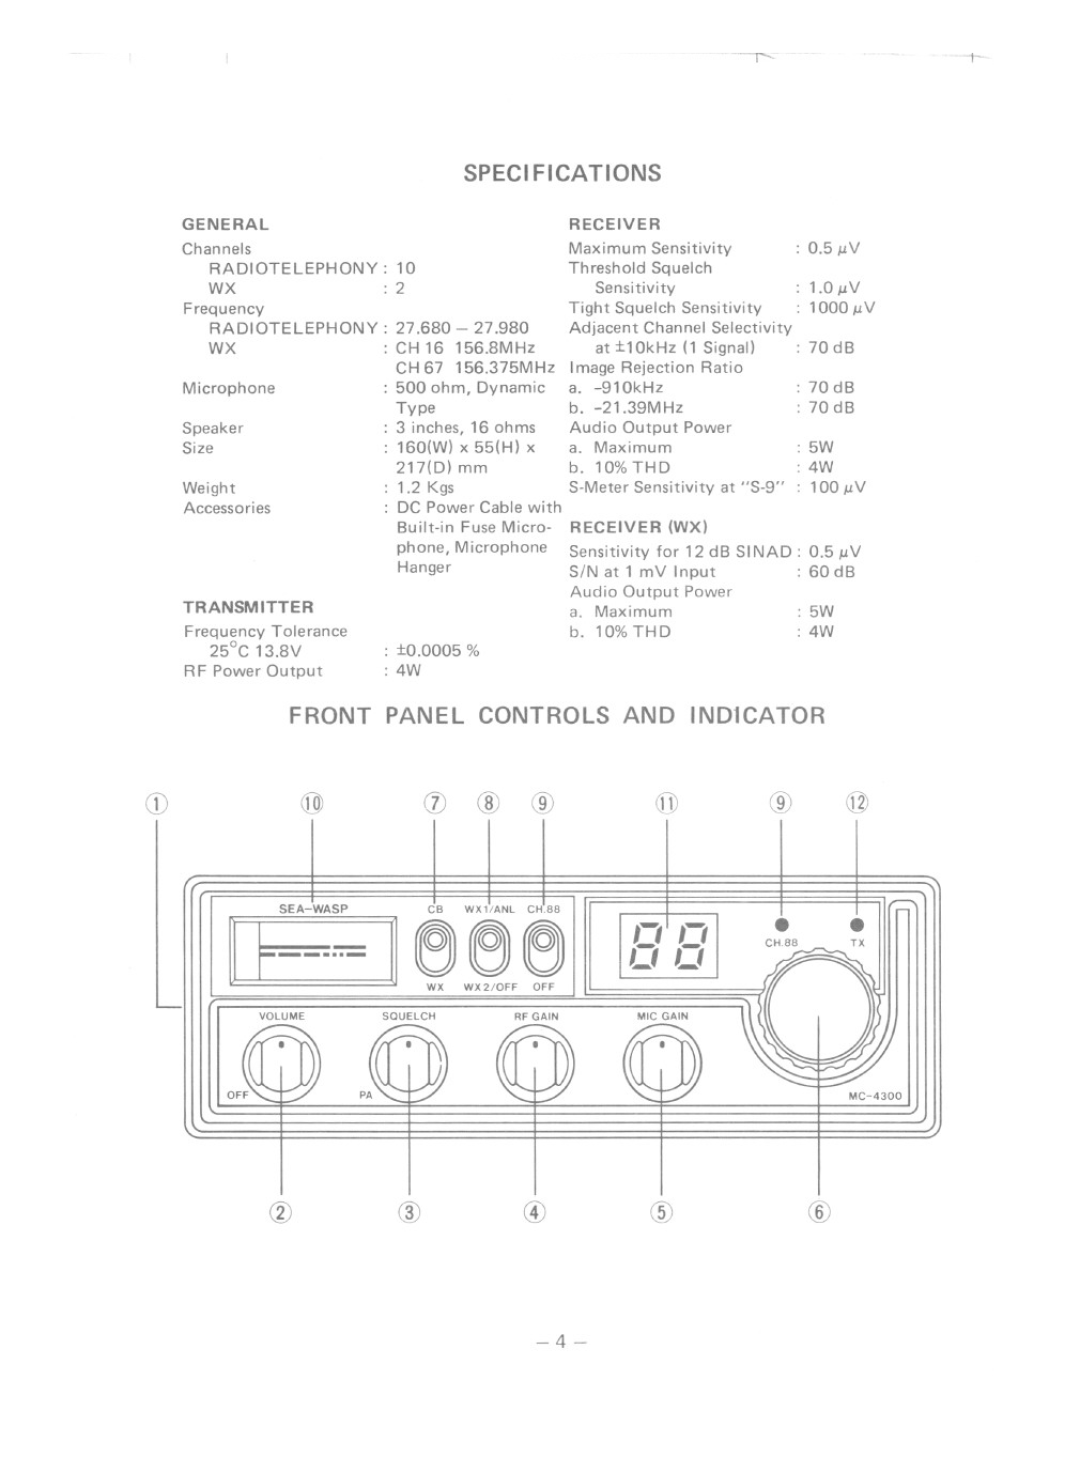 Uniden MC-4300 manual FRONT PANEL CONTROLS AND IND1CATOR, wxee, ~ Cid @ Cid @, Speci Fica Tions, General 